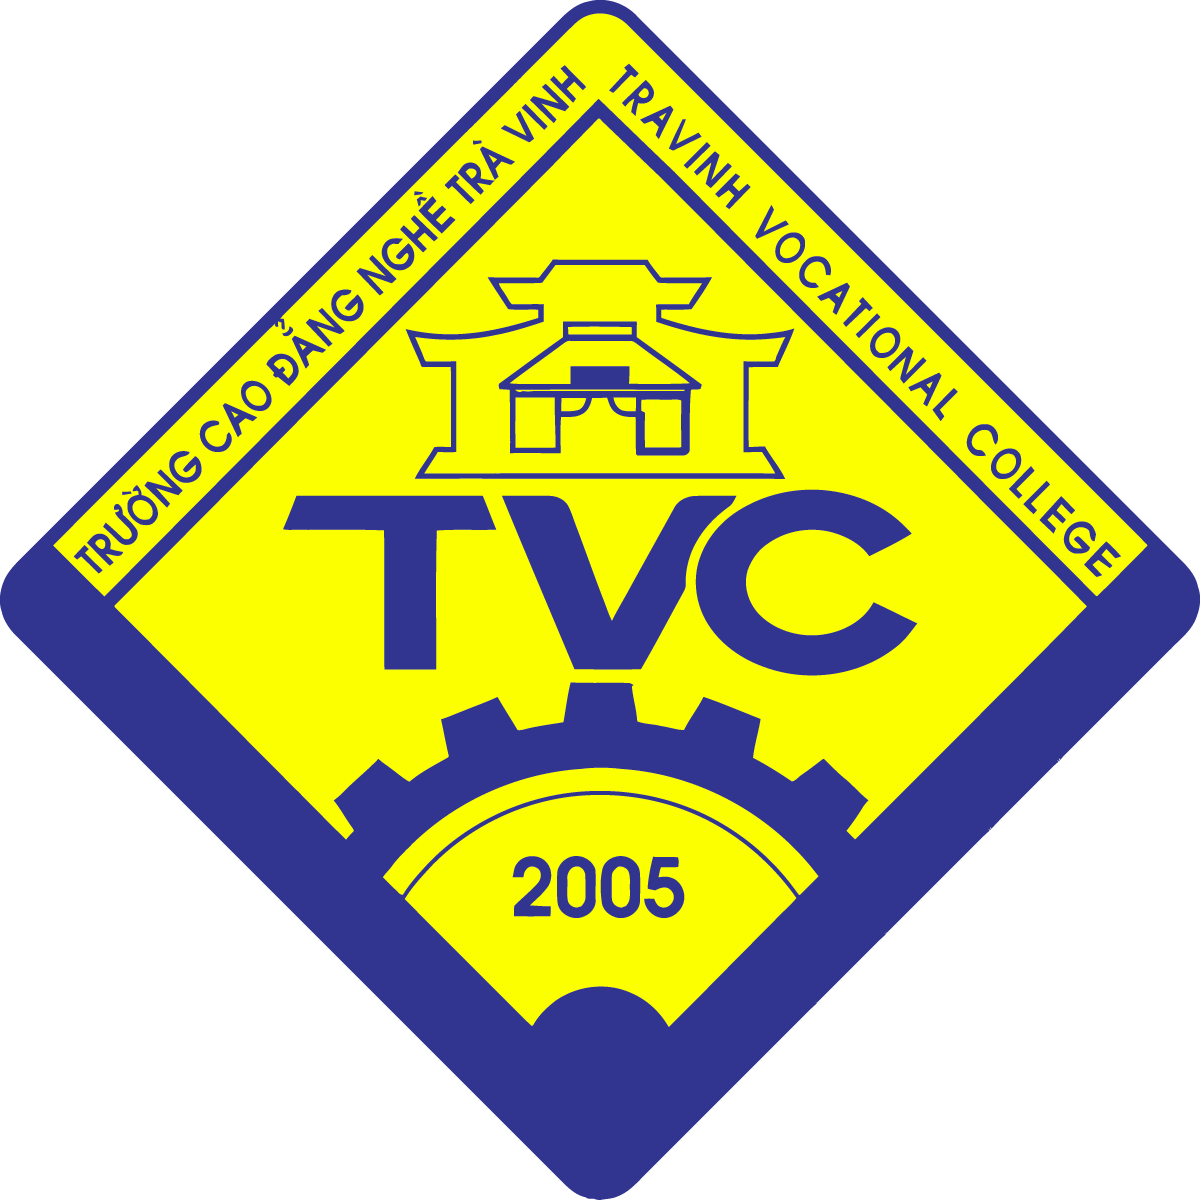 Logo Truong Cao dang Nghe Tra Vinh Tra Vinh Vocational College